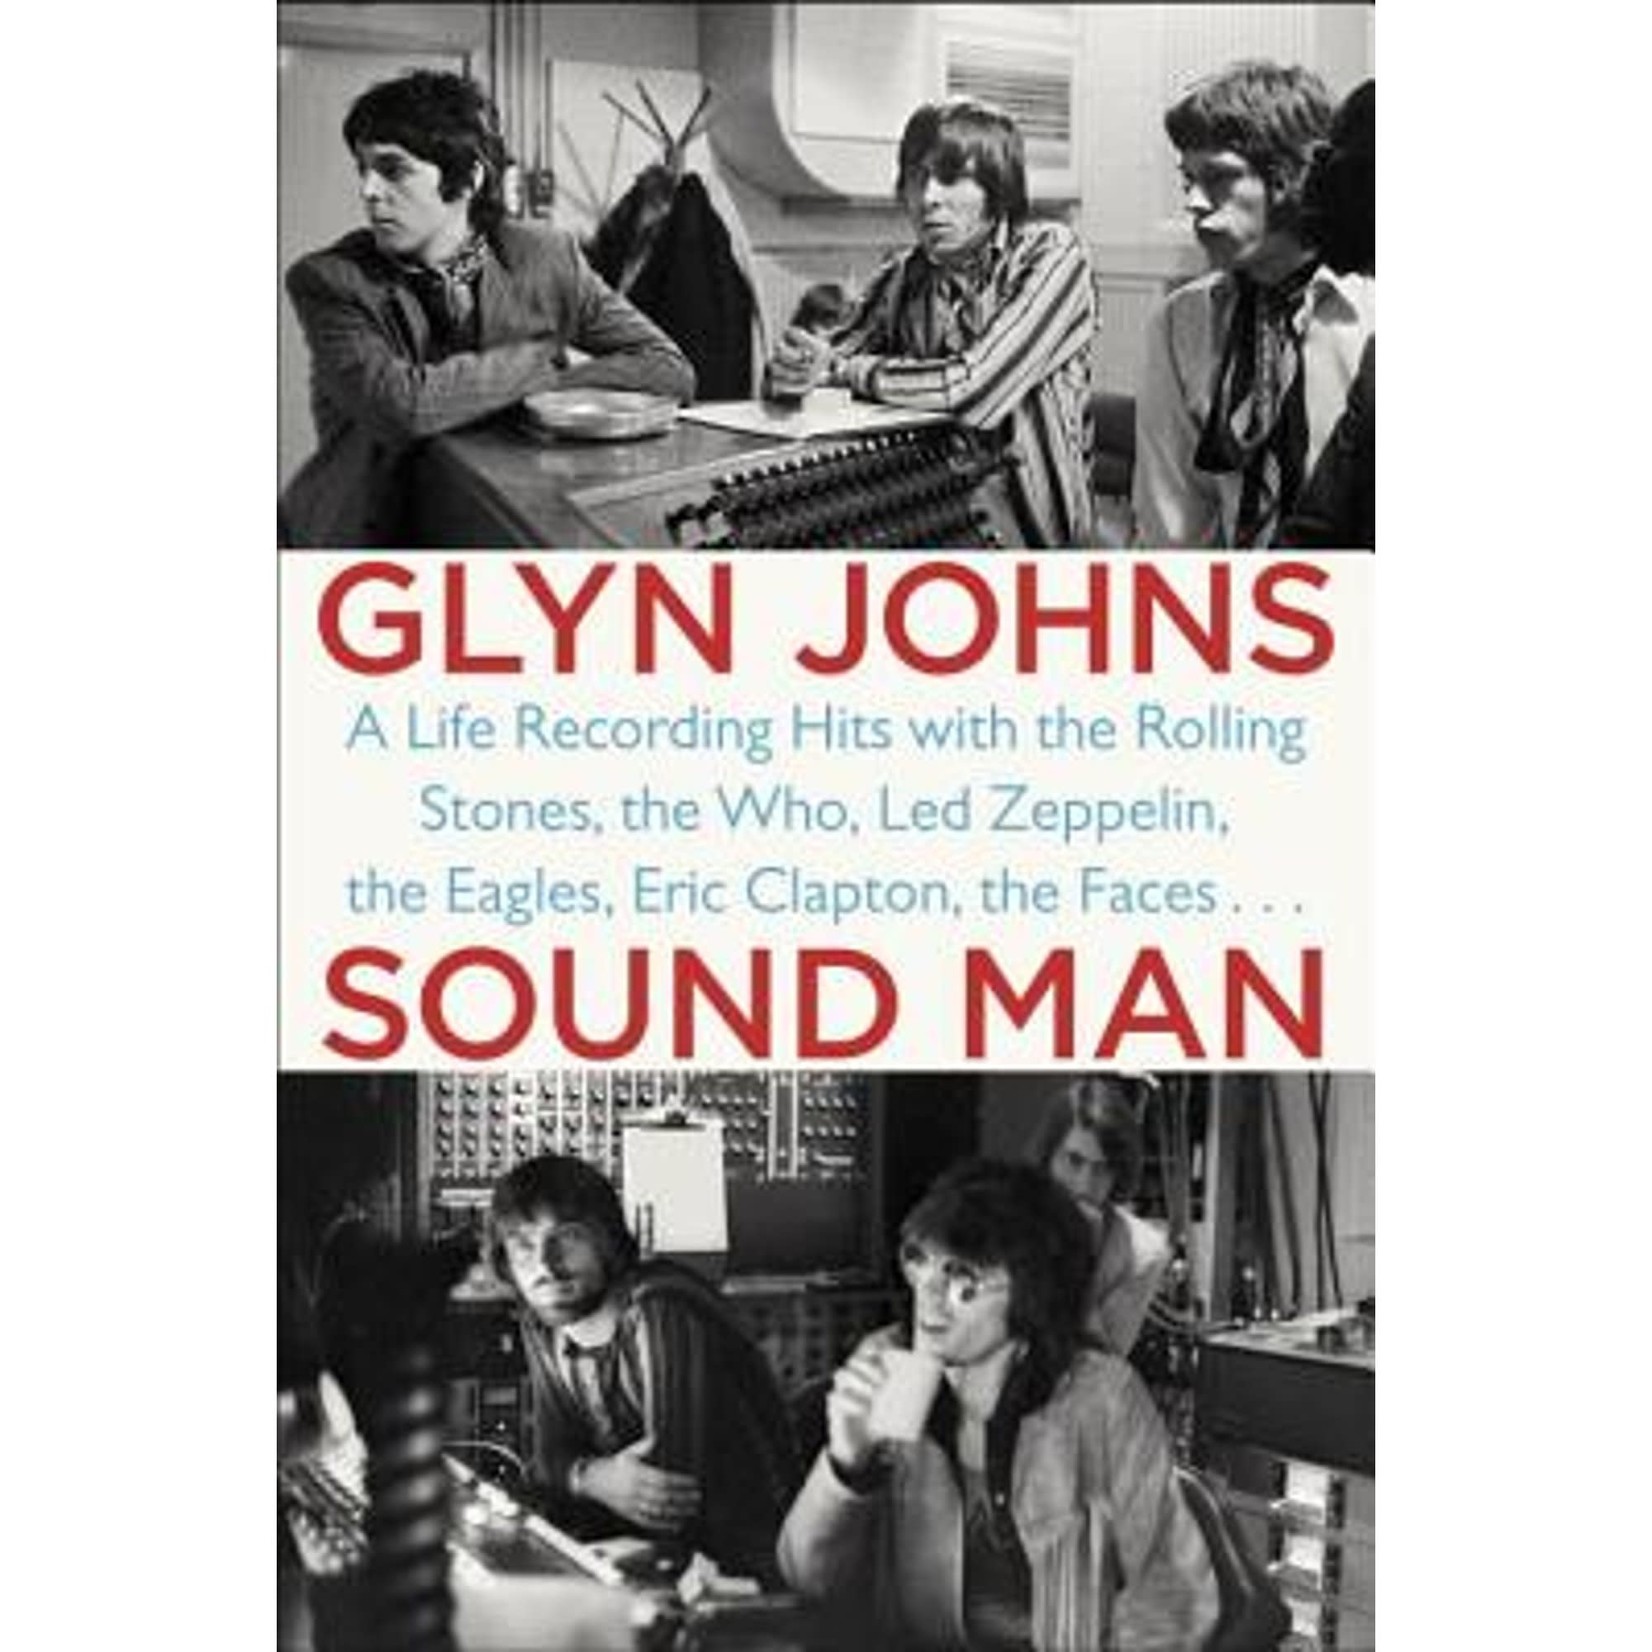 Sound Man: A Life Recording Hits With The Rolling Stones, The Who, Led Zeppelin, The Eagles , Eric Clapton, The Faces... [Book]